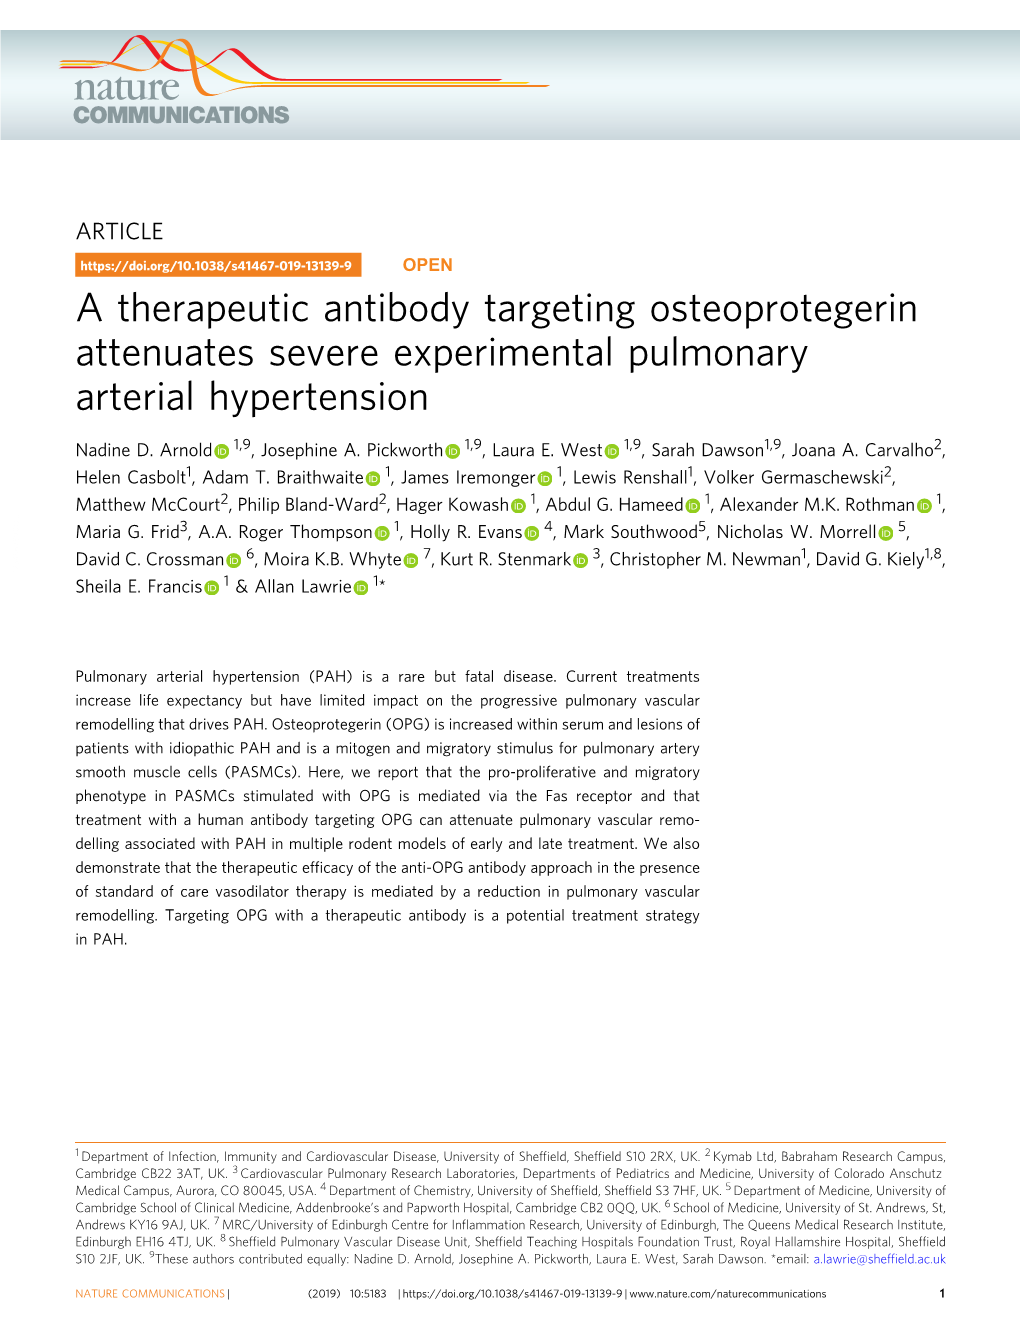 A Therapeutic Antibody Targeting Osteoprotegerin Attenuates Severe Experimental Pulmonary Arterial Hypertension